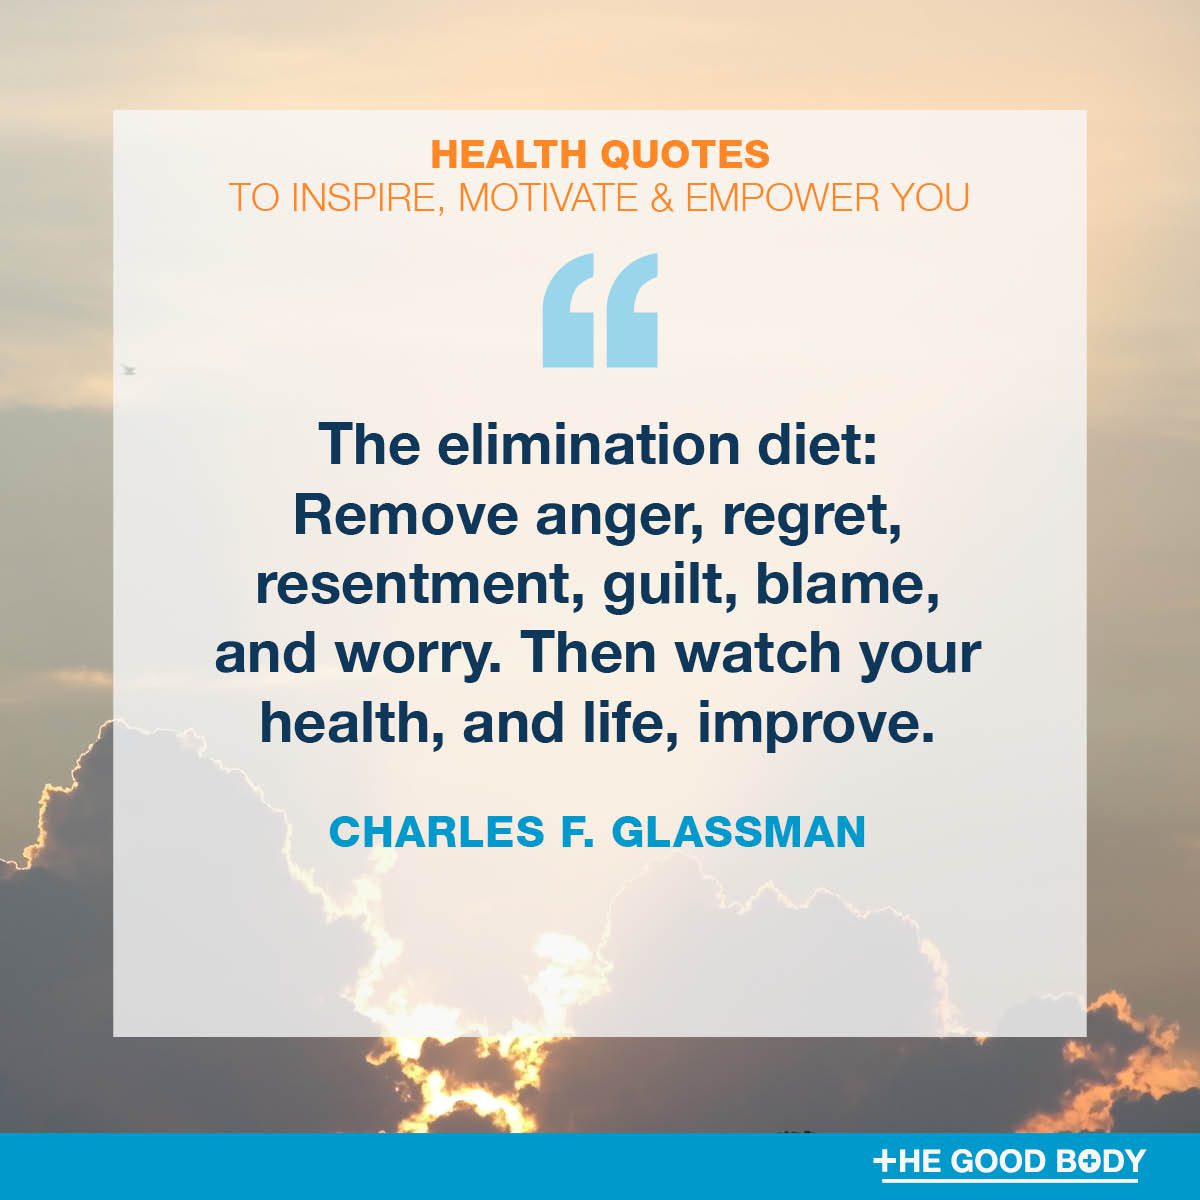 General Health and Wellness Quotes #9 by Charles F. Glassman